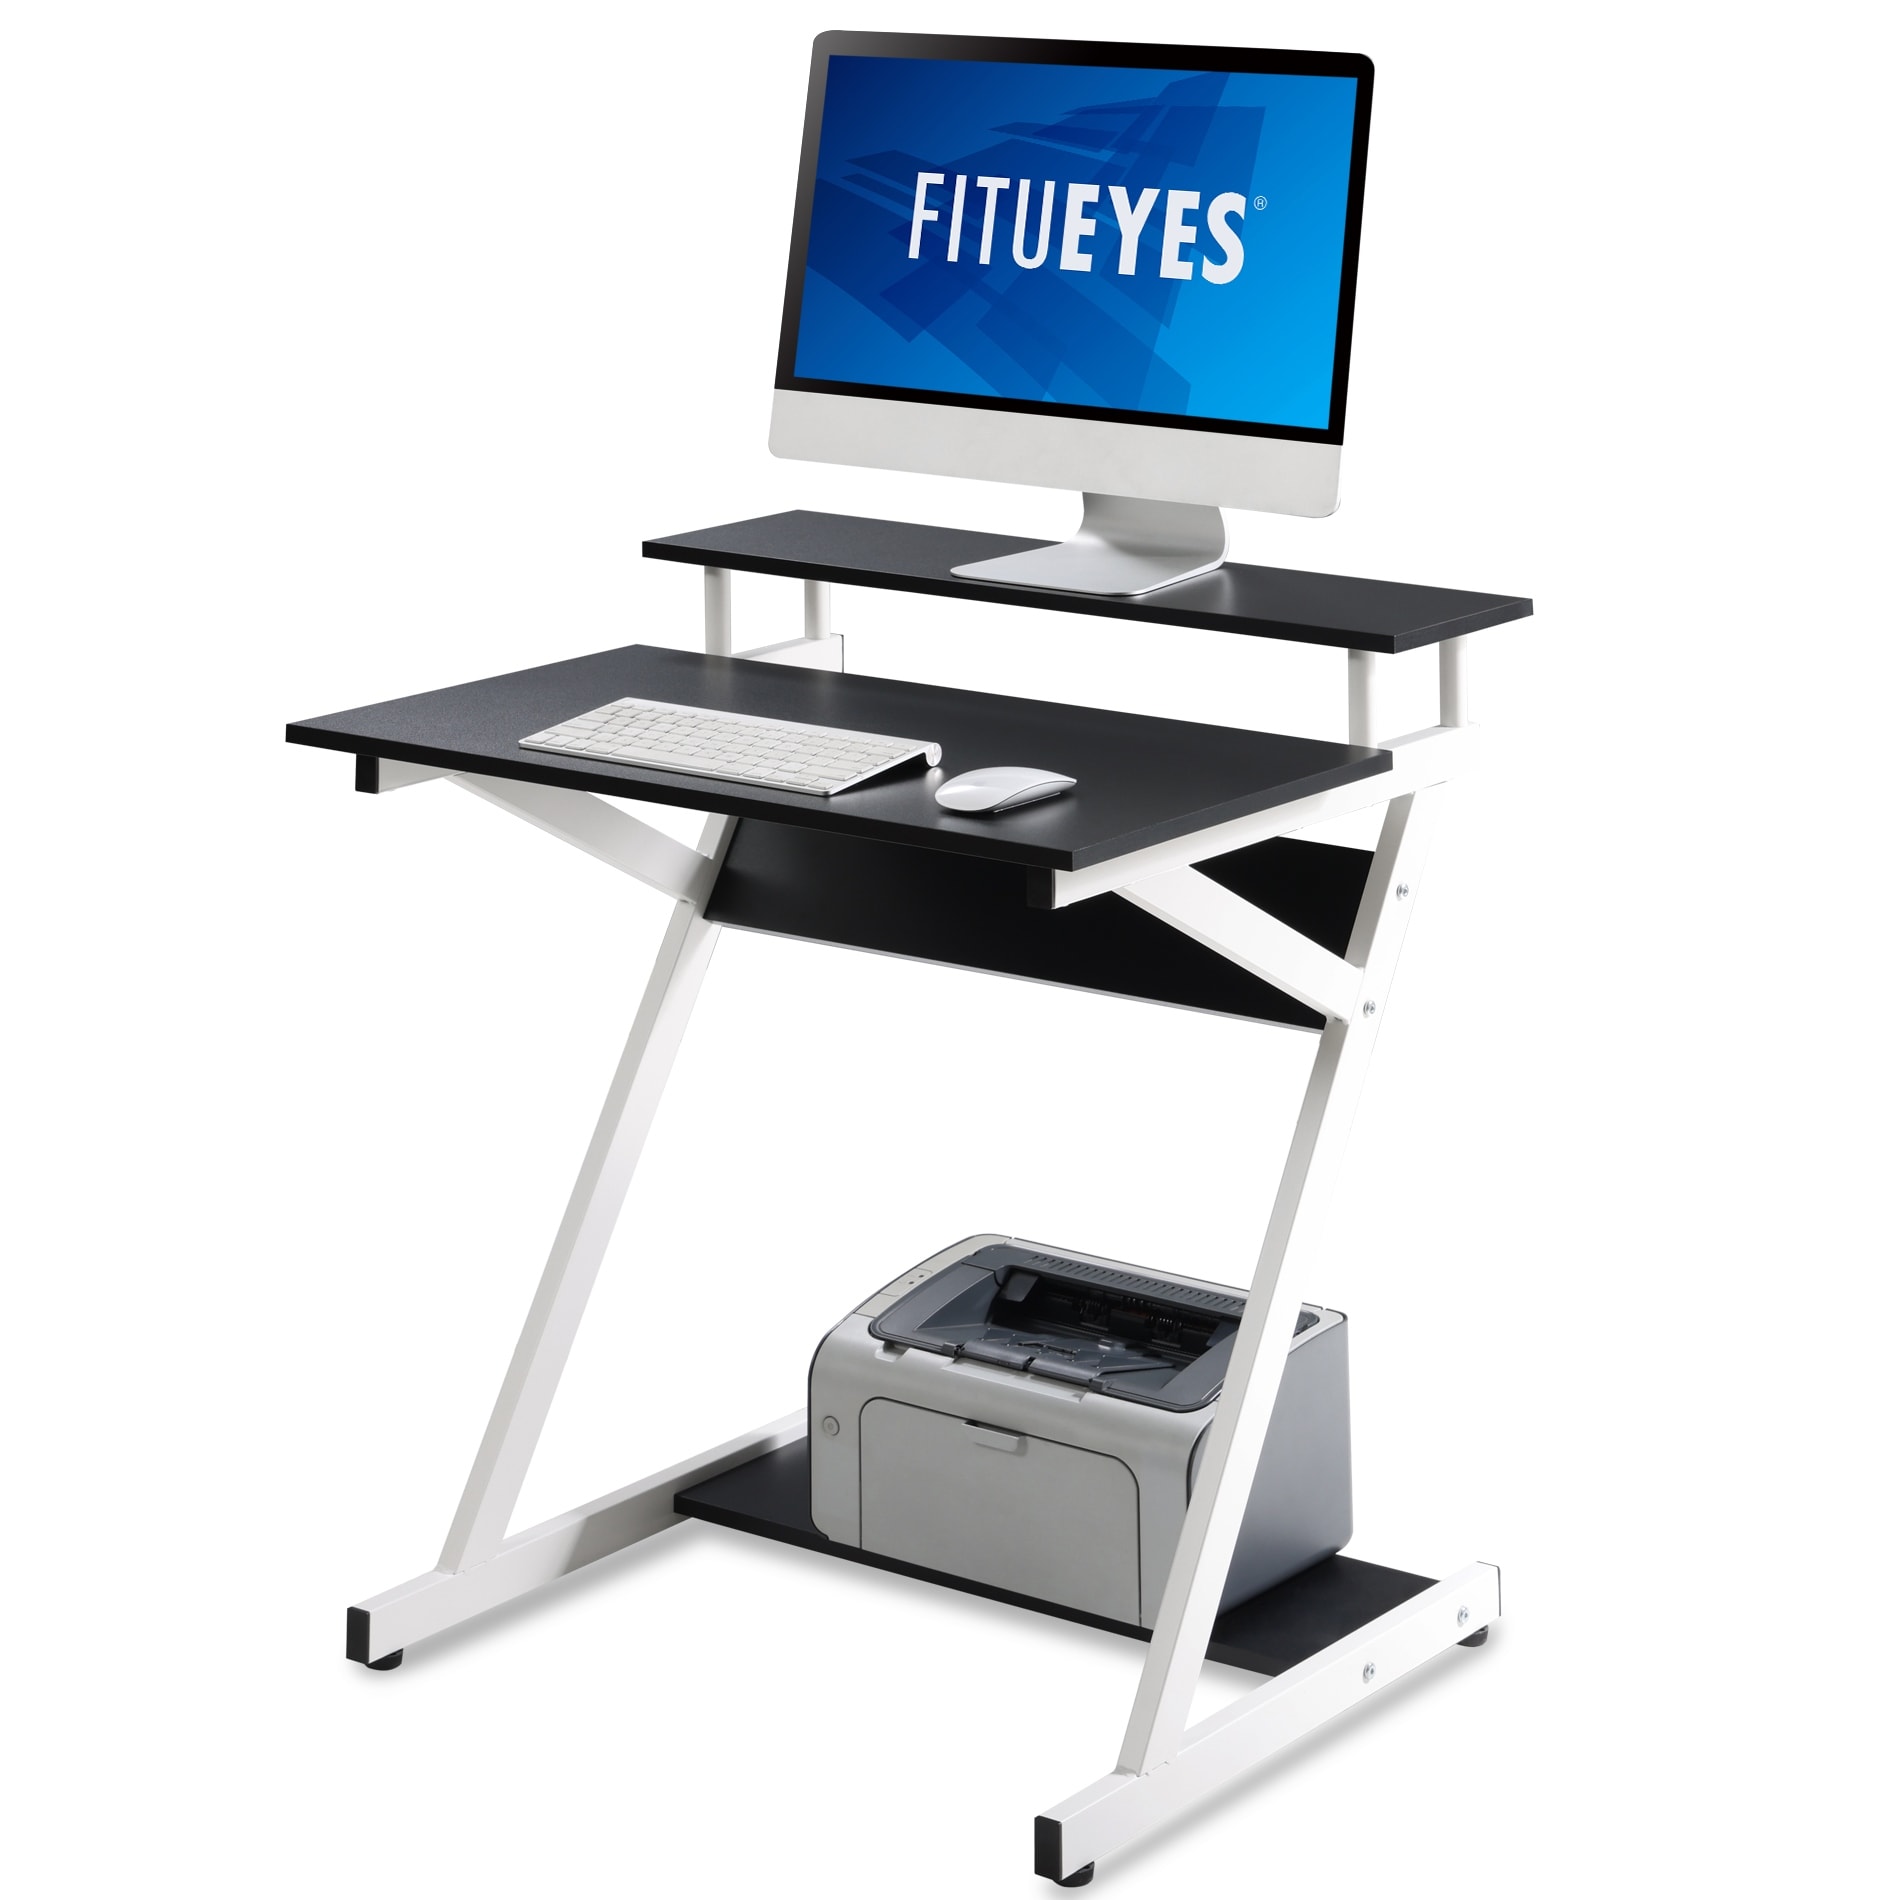 https://ak1.ostkcdn.com/images/products/is/images/direct/8aa05b0893601e8954352c591f081be93d0f568f/FITUEYES-Computer-Desk-with-Monitor-Shelf-Corner-Study-Writing-Desk.jpg